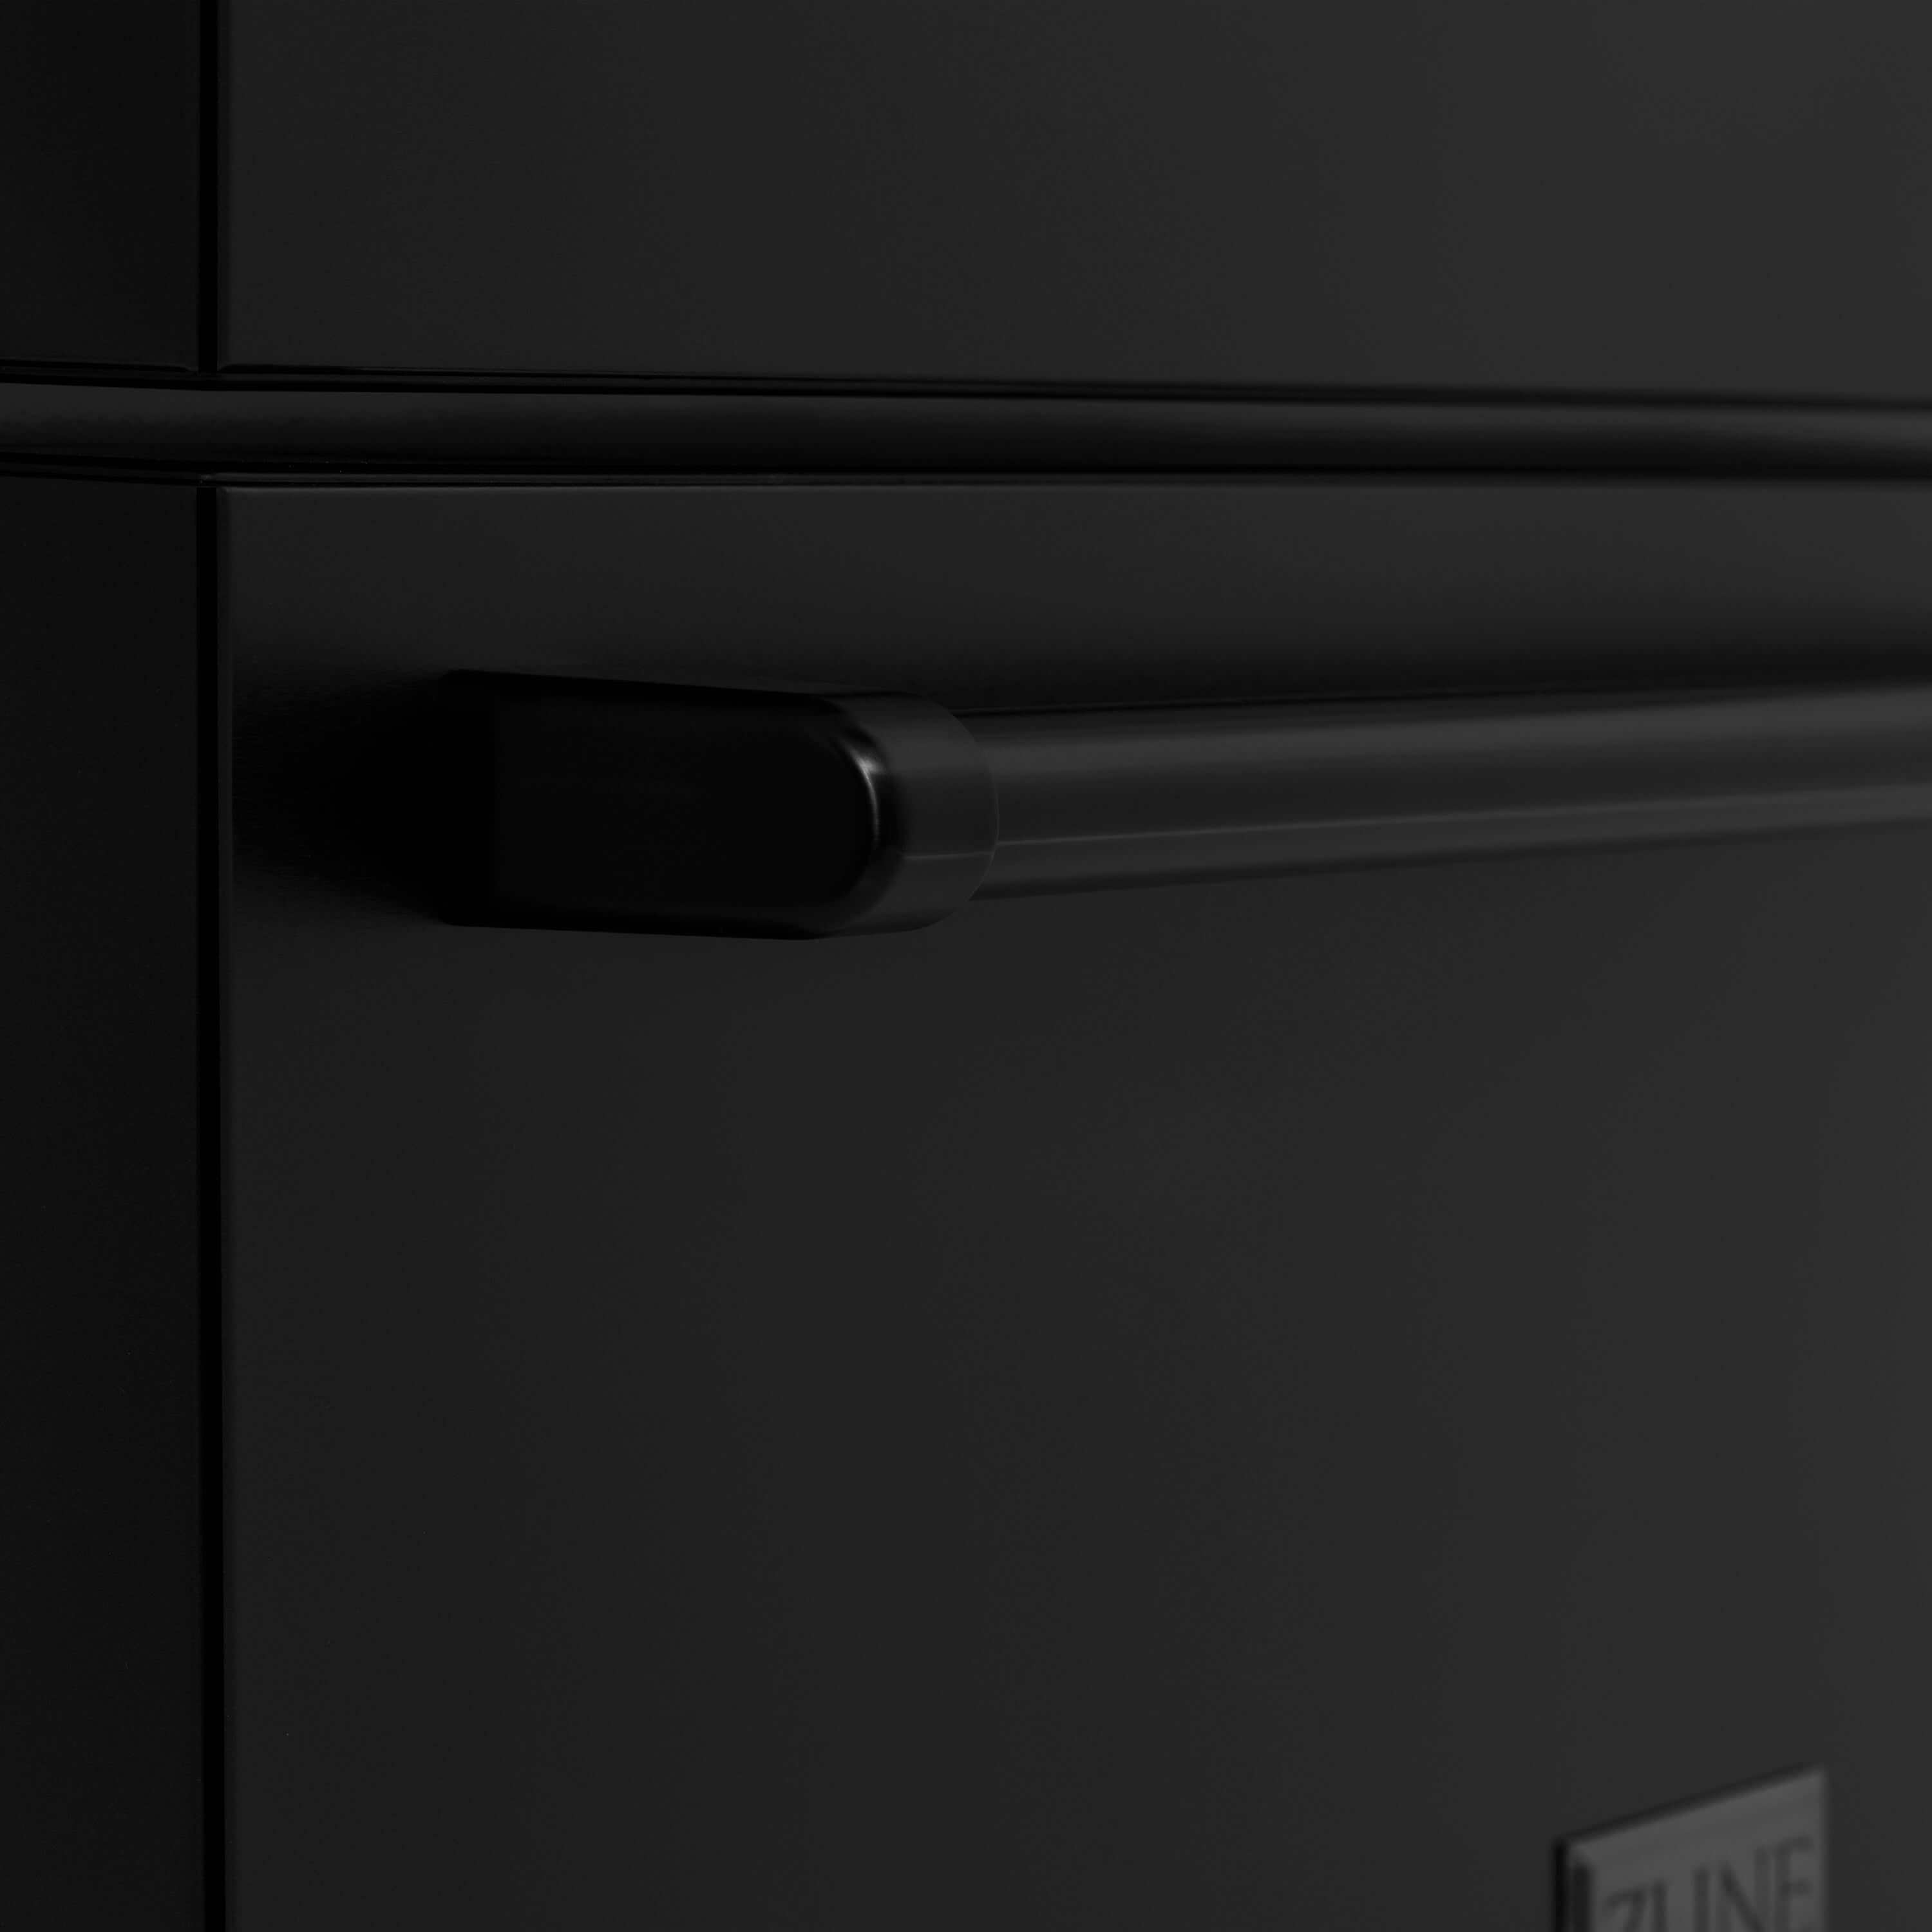 ZLINE 36 in. Freestanding French Door Refrigerator with Ice Maker in Black Stainless Steel (RFM-36-BS) close-up bottom freezer handle.